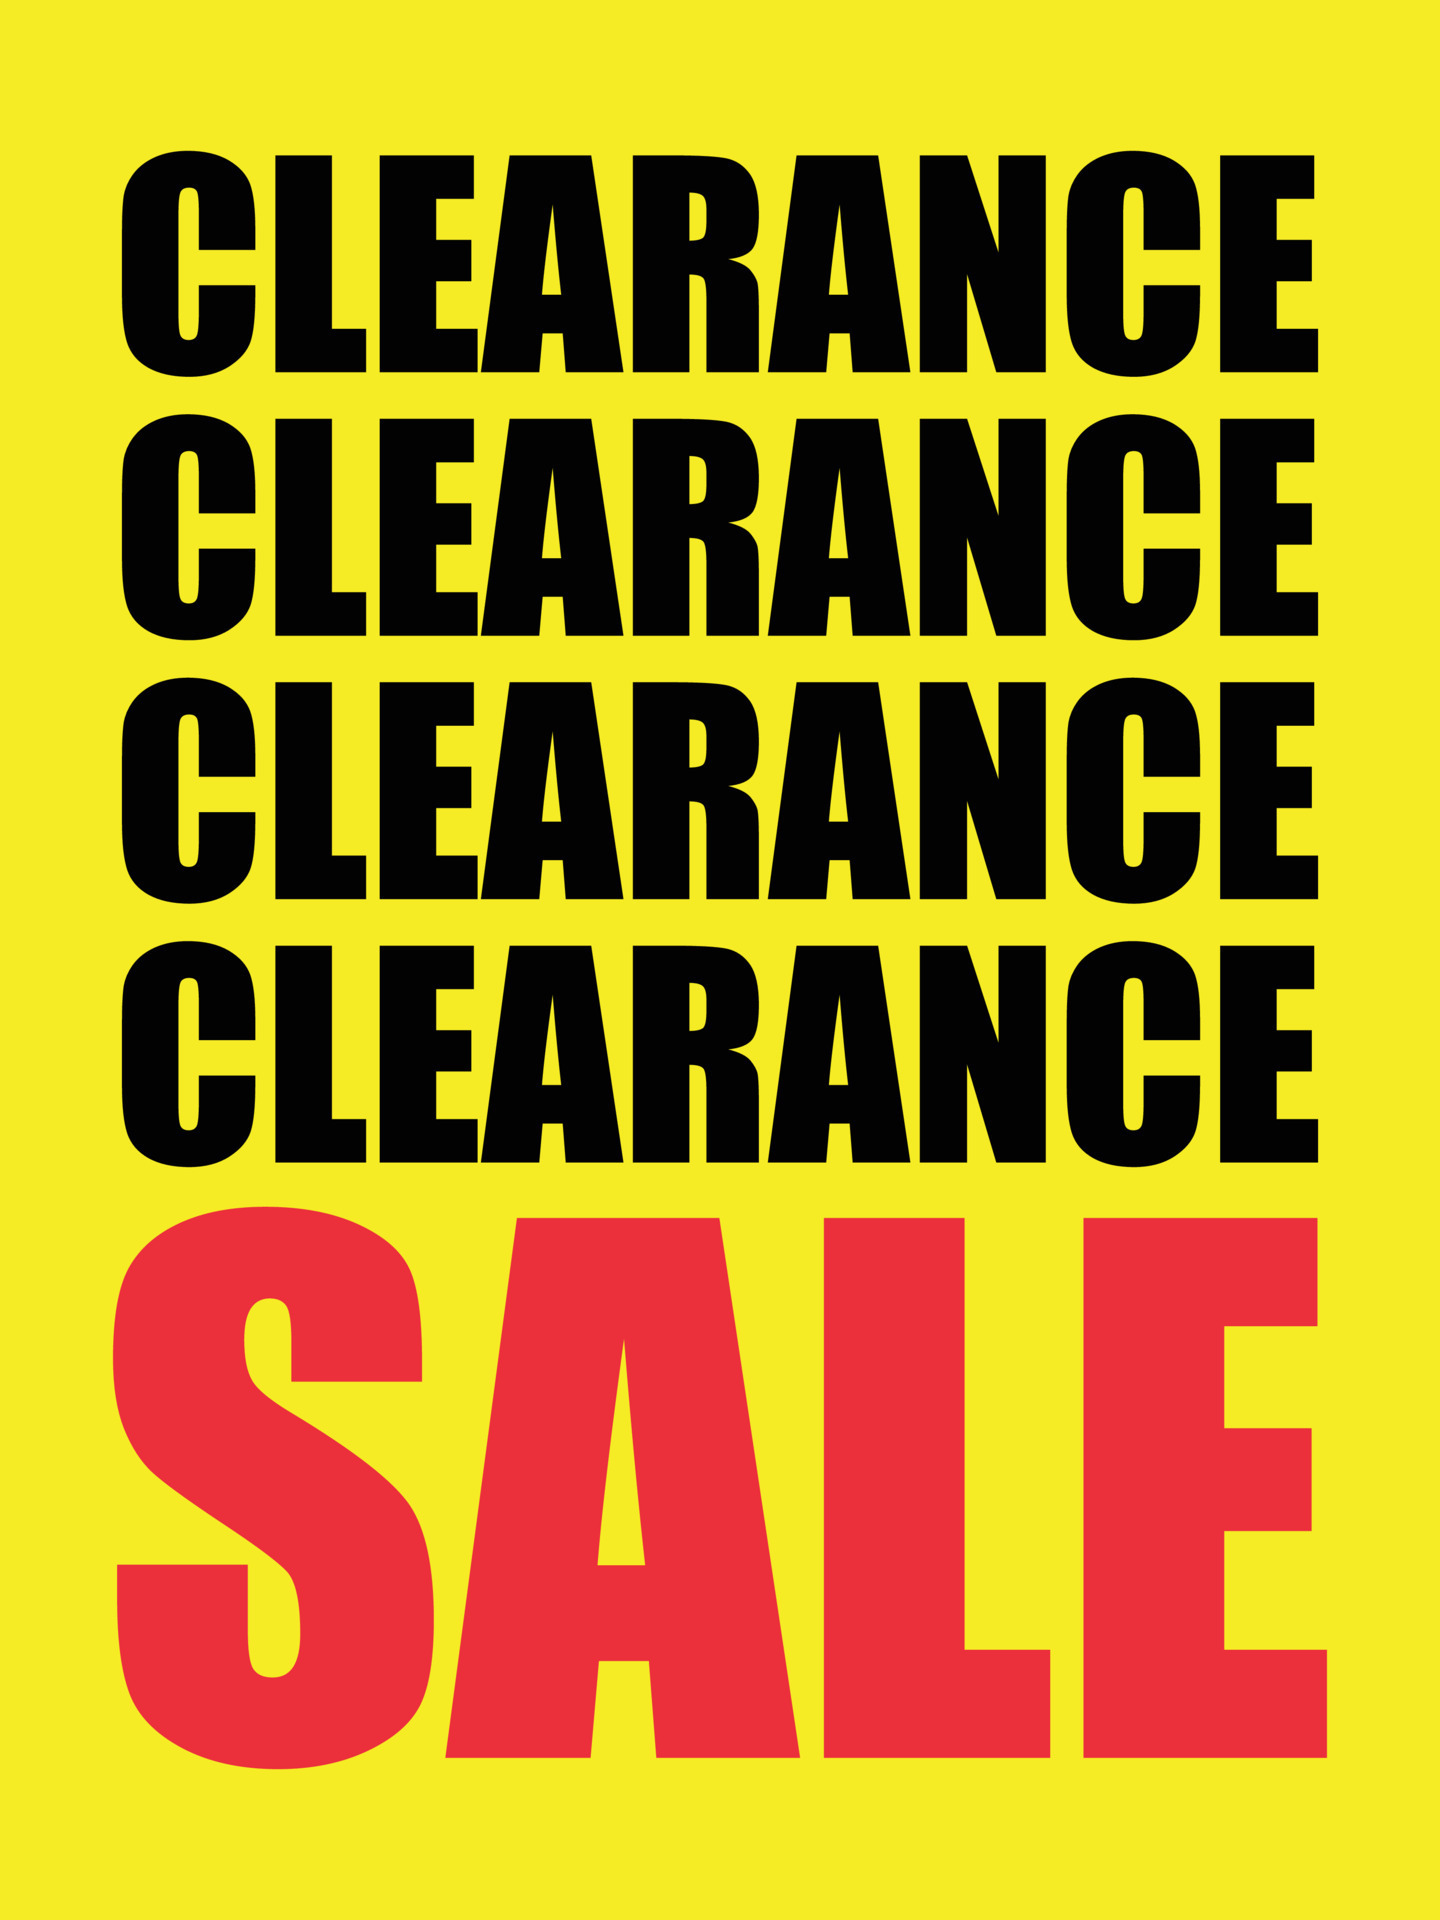 Printable Clearance Sale Display Sign 20796250 Vector Art at Vecteezy